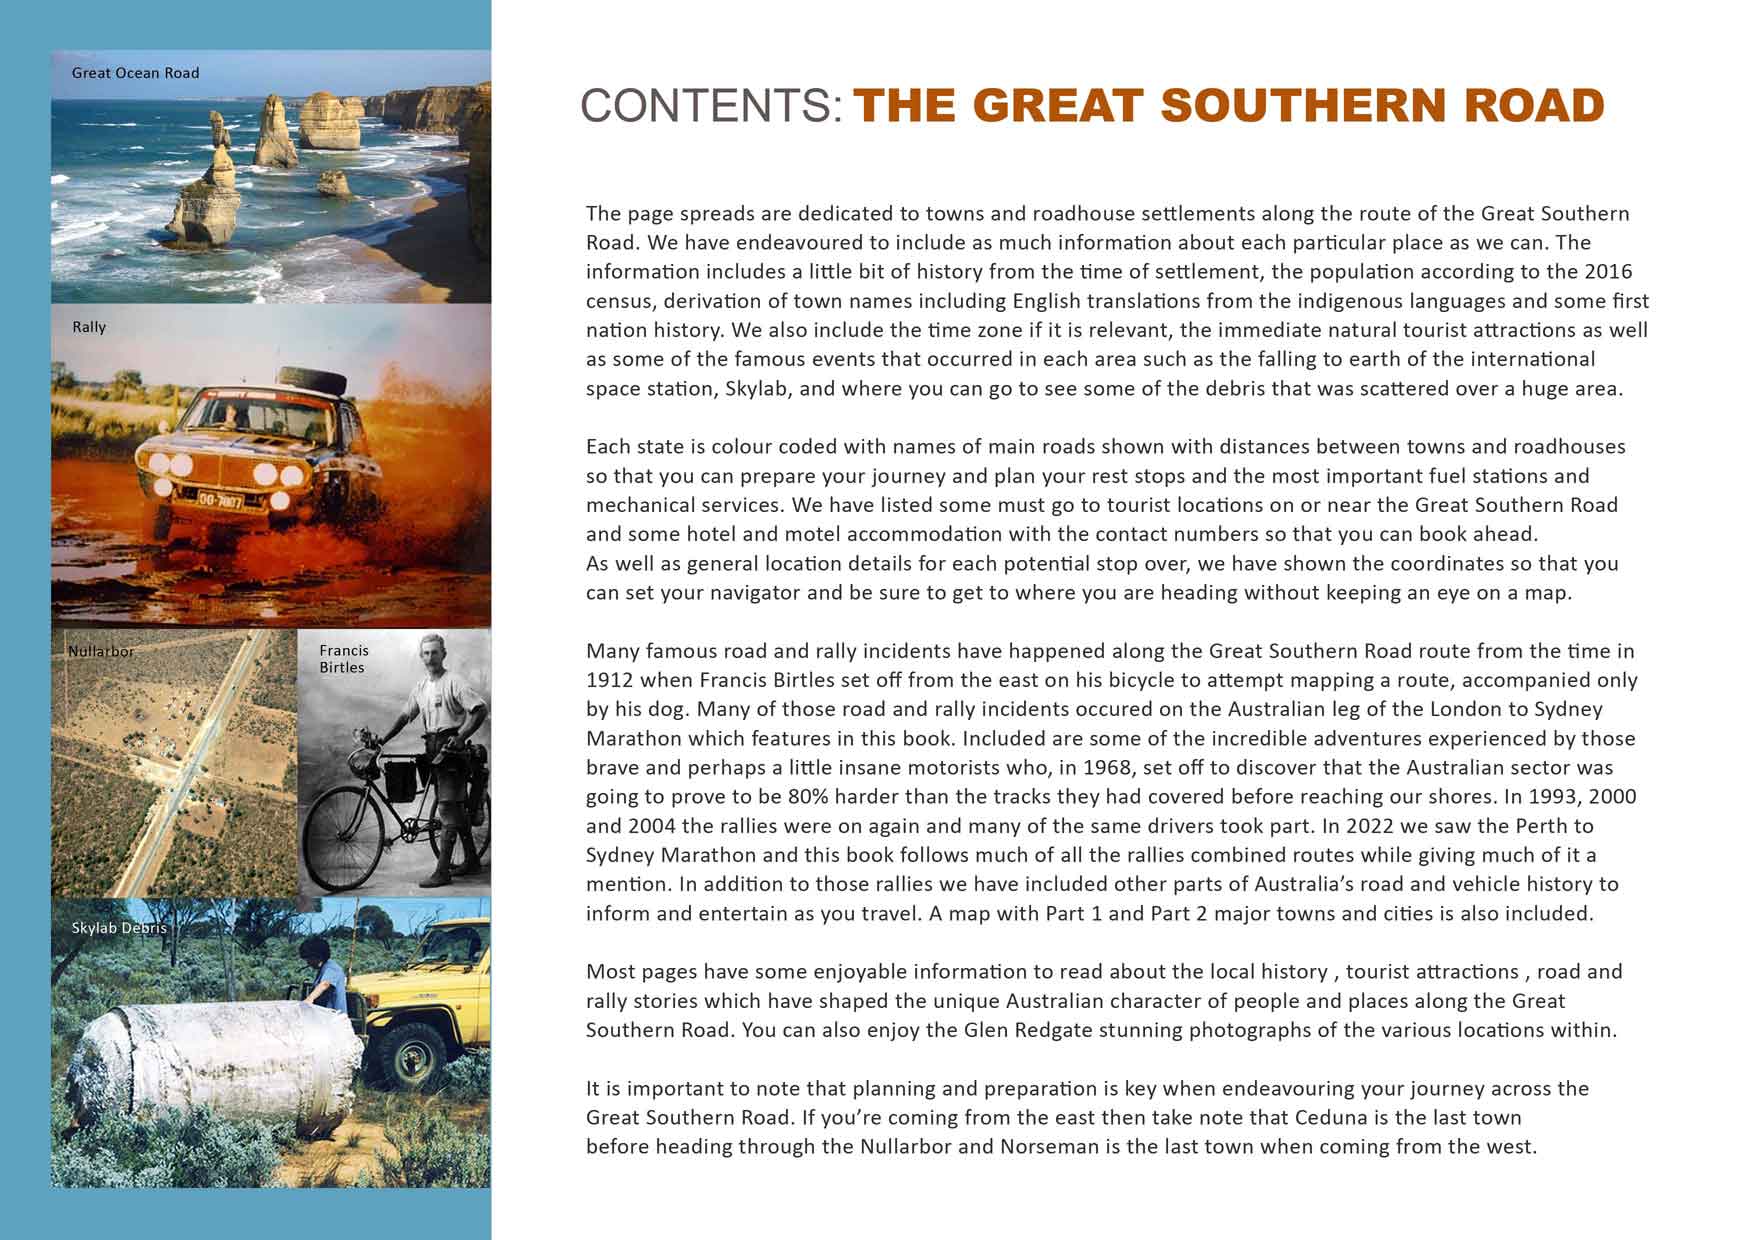 Great Southern Road - Road history 1